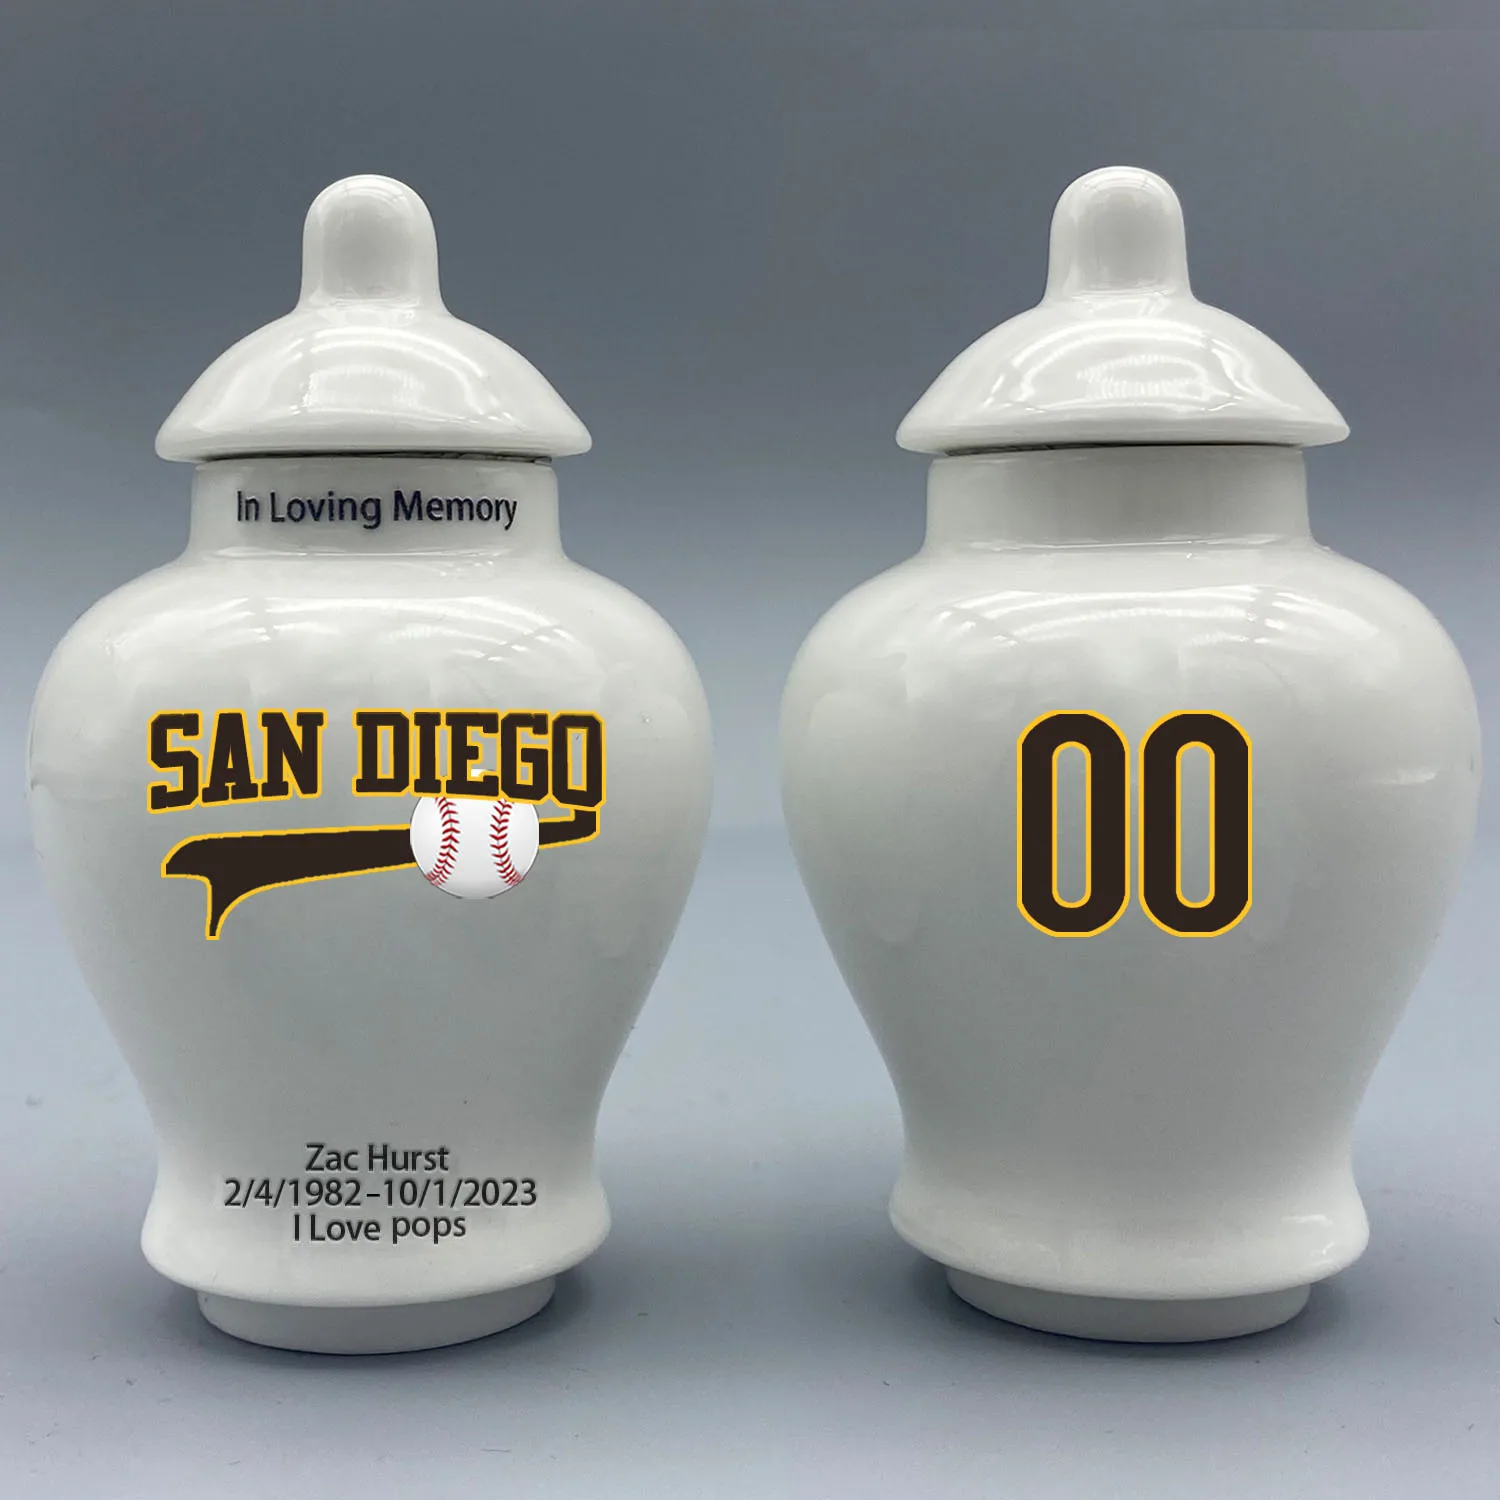 

Mini Urn for San Diego Padres-Baseball themed.Please send me the customization information - name/date and number on the urn